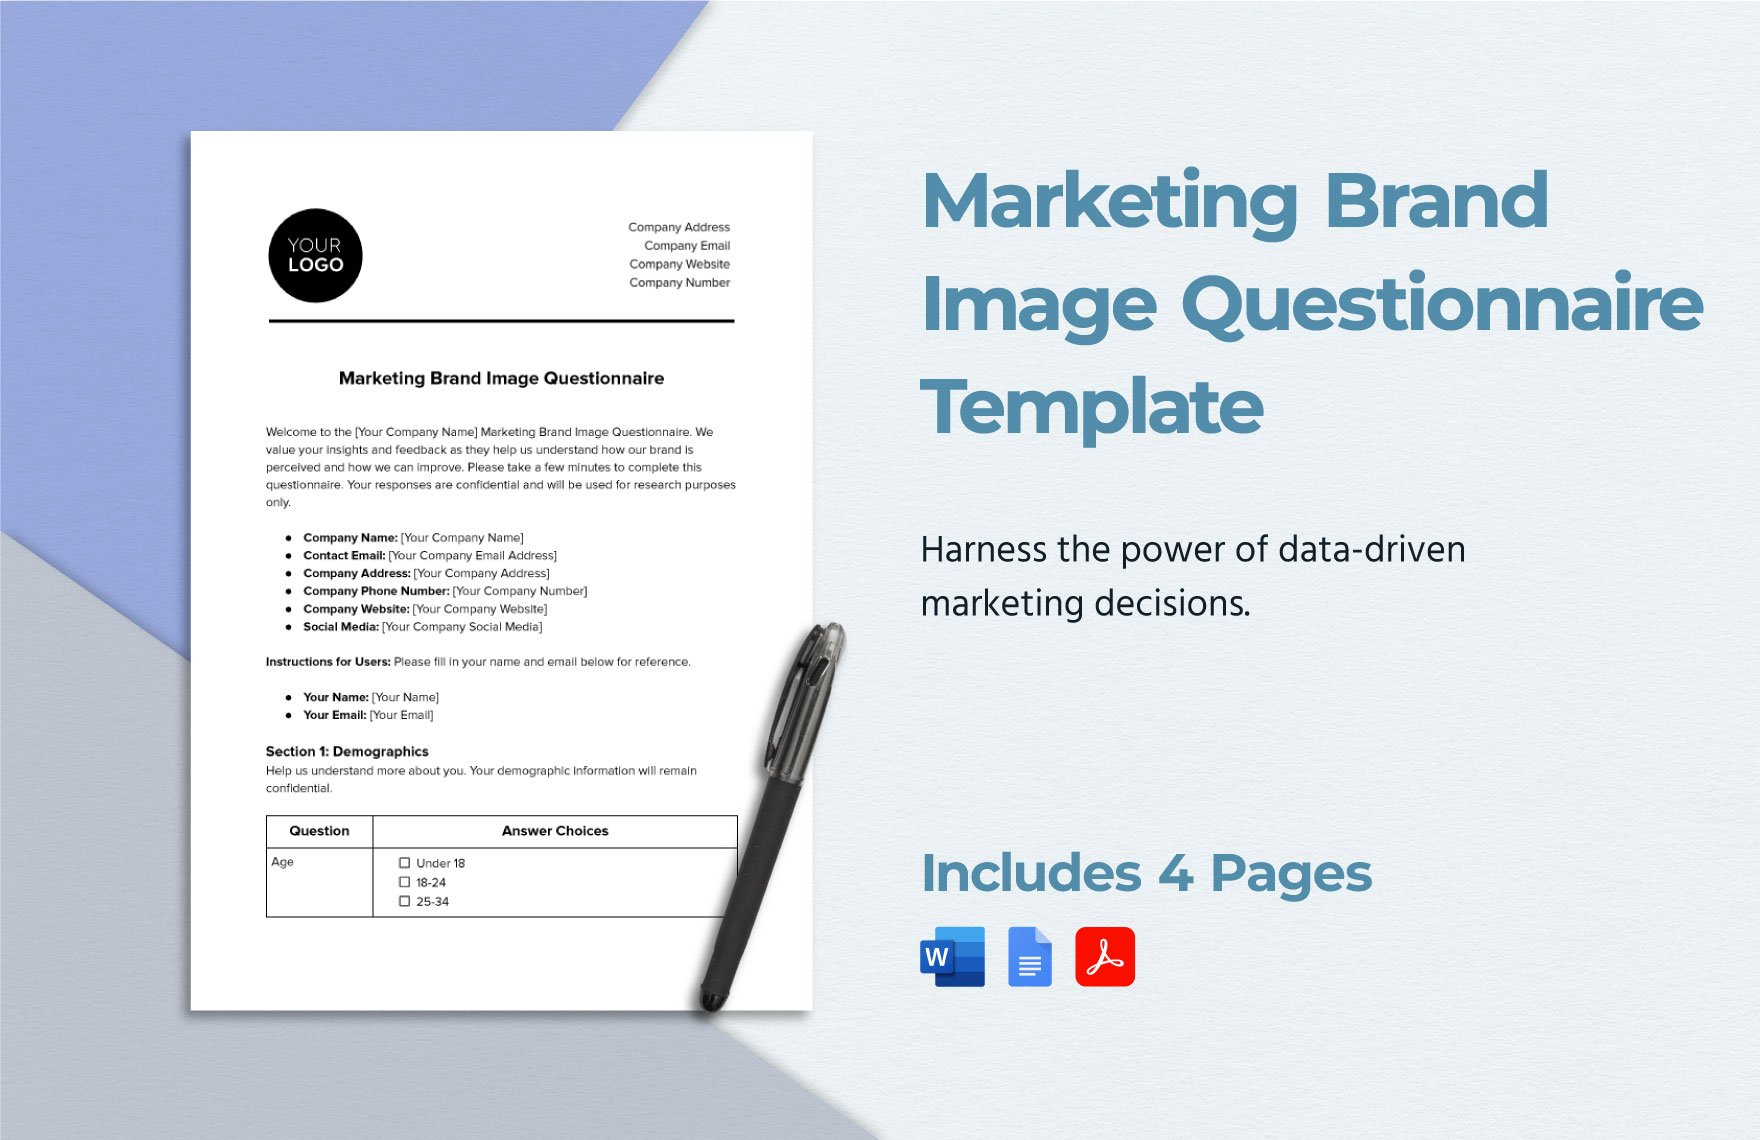 Marketing Brand Image Questionnaire Template in Word, Google Docs, PDF